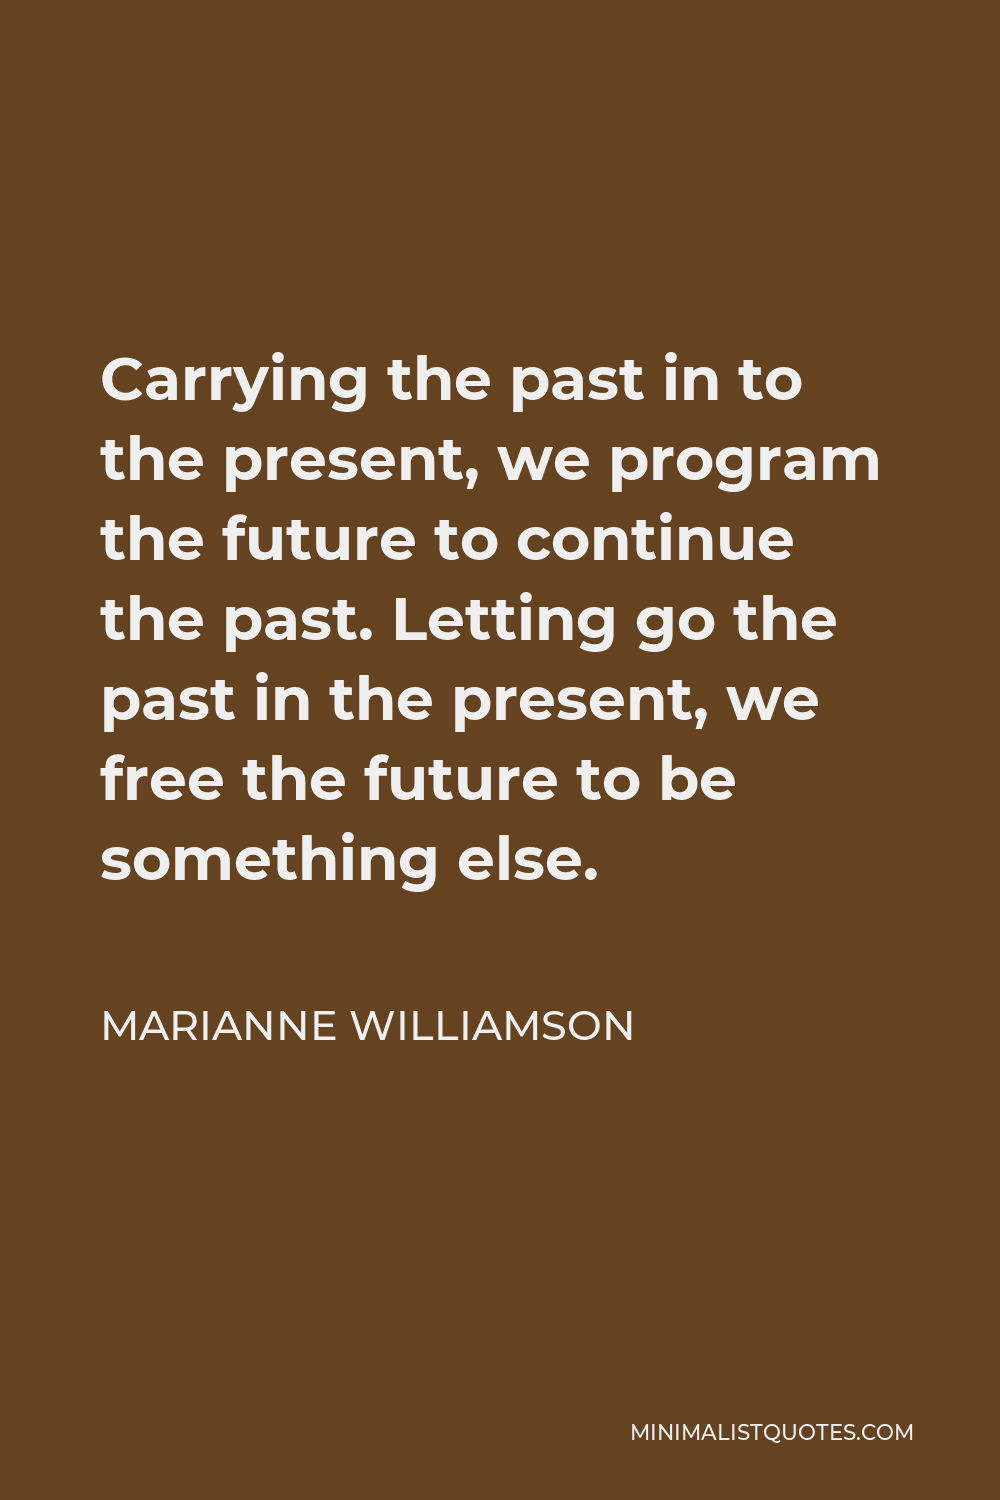 Marianne Williamson Quote - Carrying the past in to the present, we program the future to continue the past. Letting go the past in the present, we free the future to be something else.